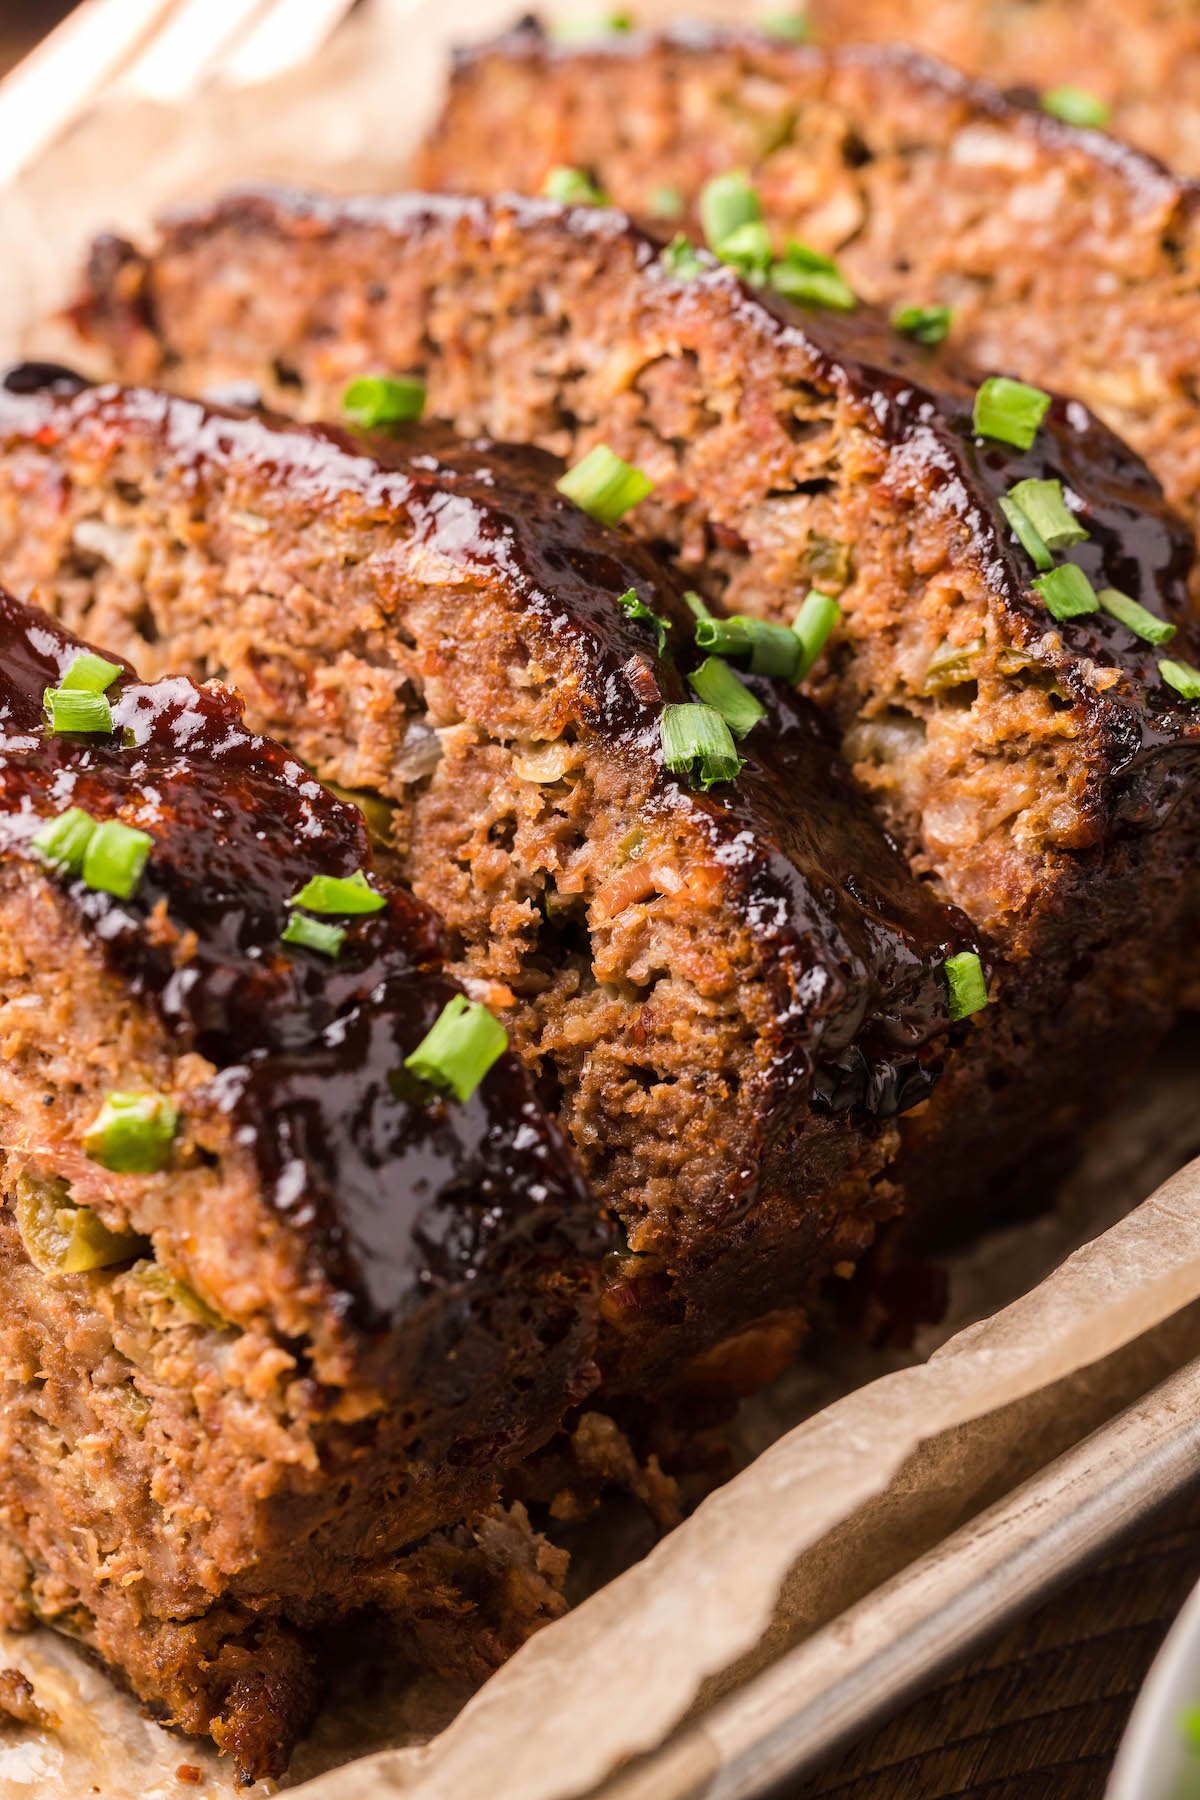 Slices of meatloaf topped with BBQ sauce and green onions.